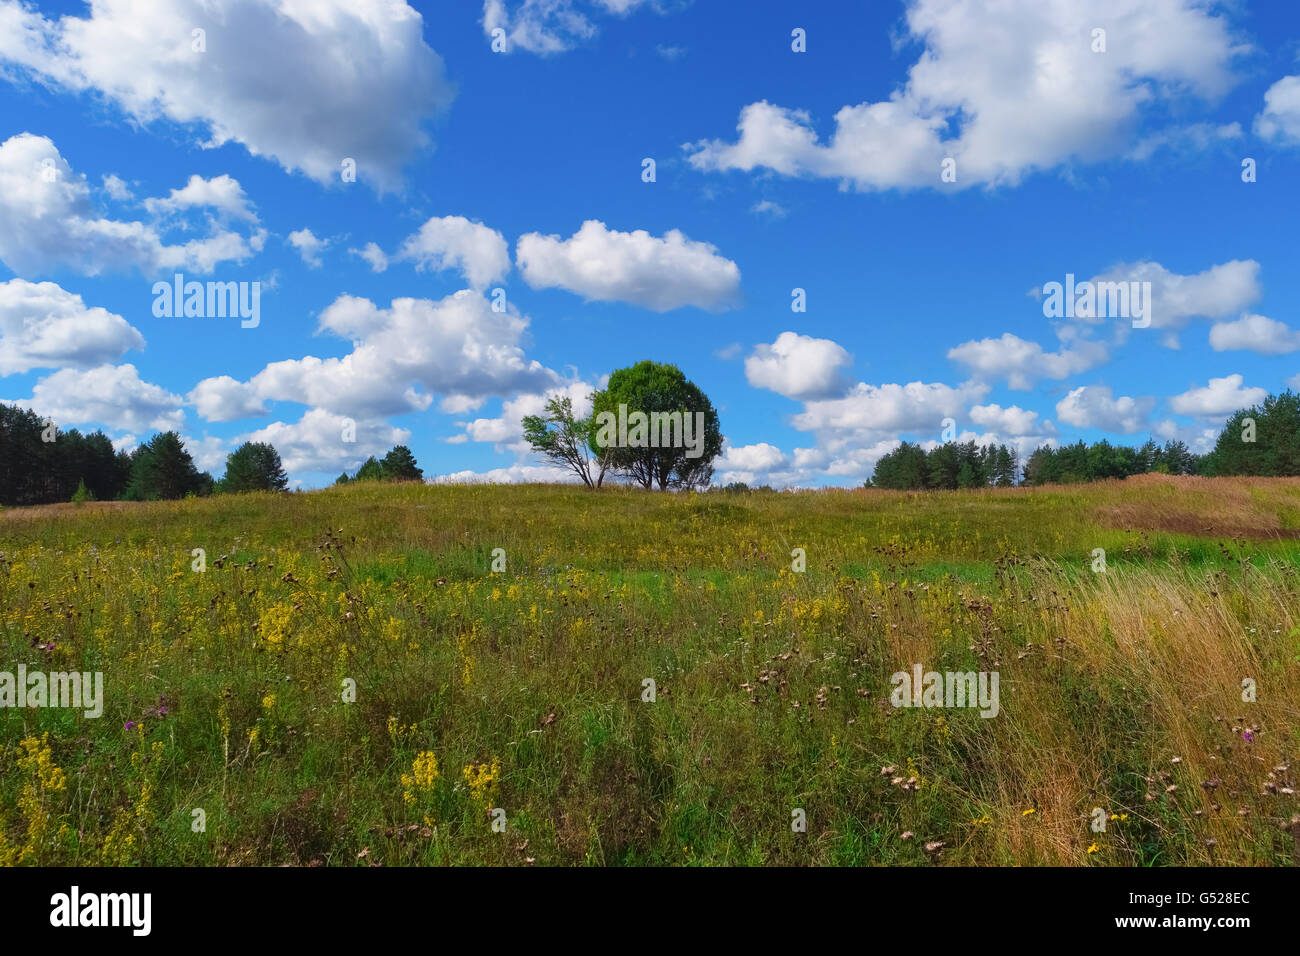 Summer landscape with grass, trees, sky and clouds Stock Photo